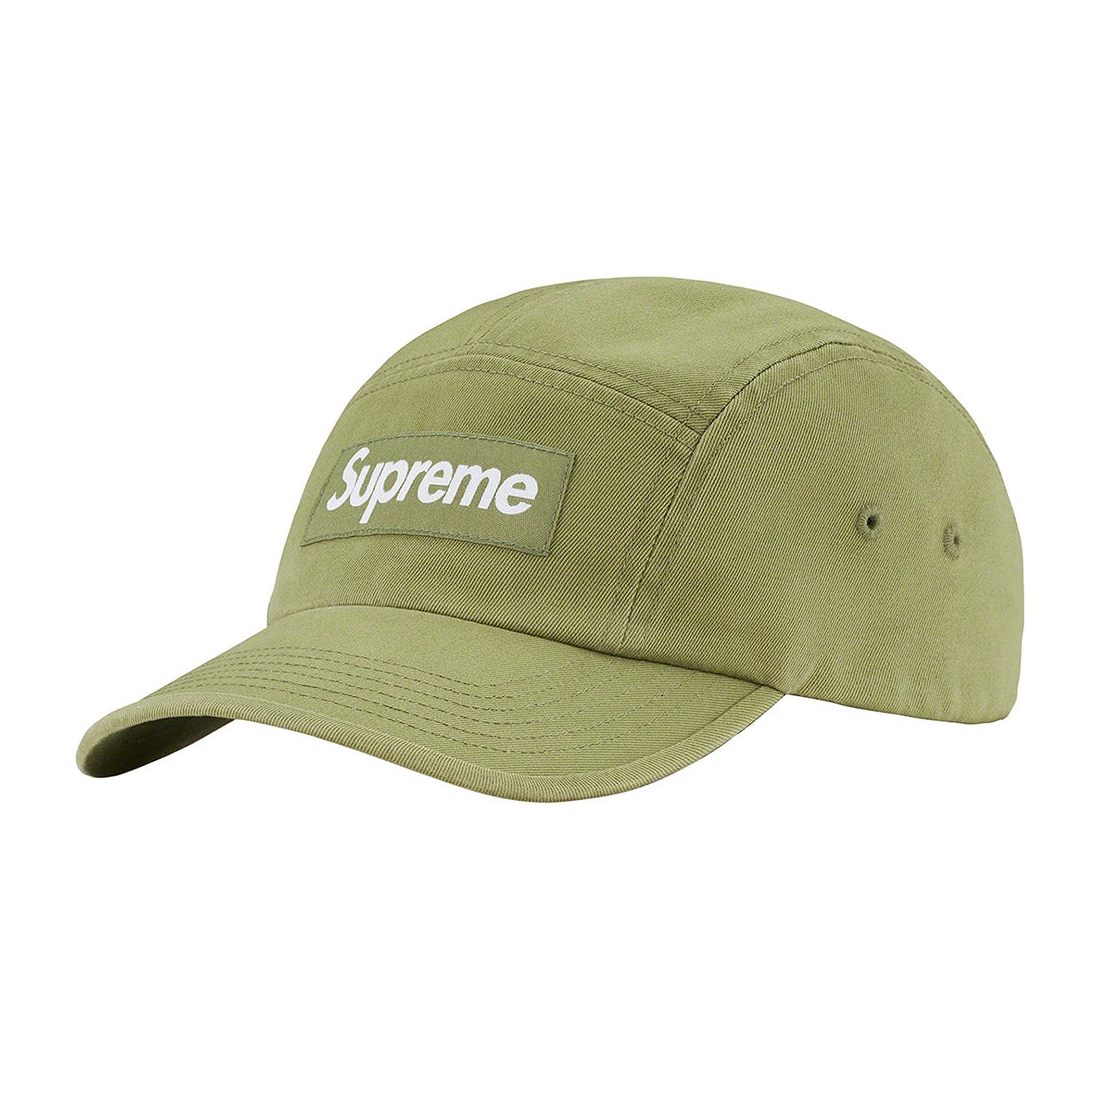 Details on Washed Chino Twill Camp Cap Olive from spring summer 2023 (Price is $48)